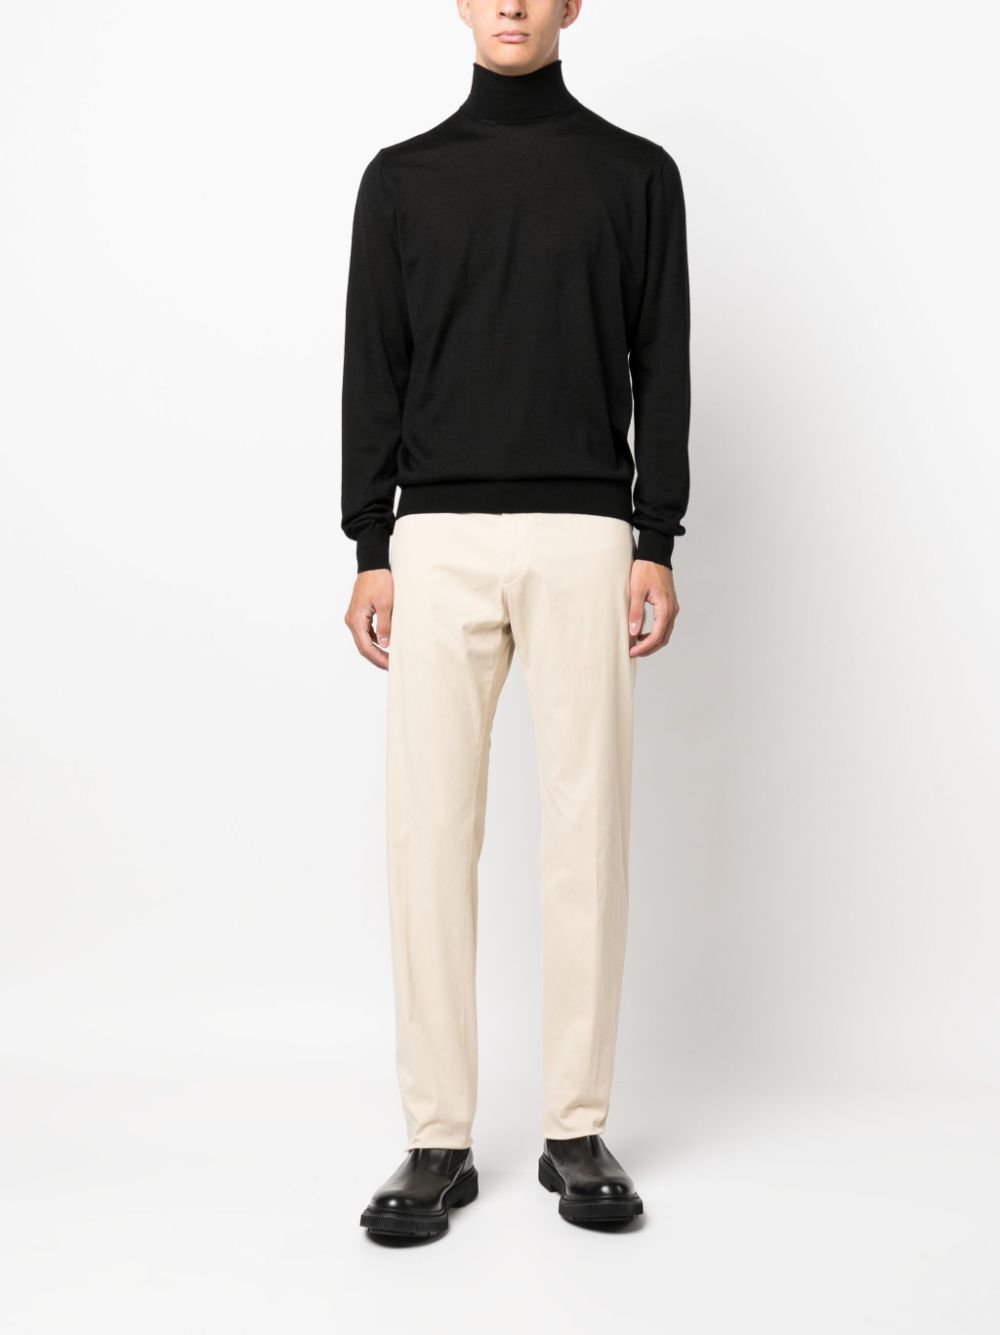 Colombo COLOMBO- Cashmere High-neck Sweater